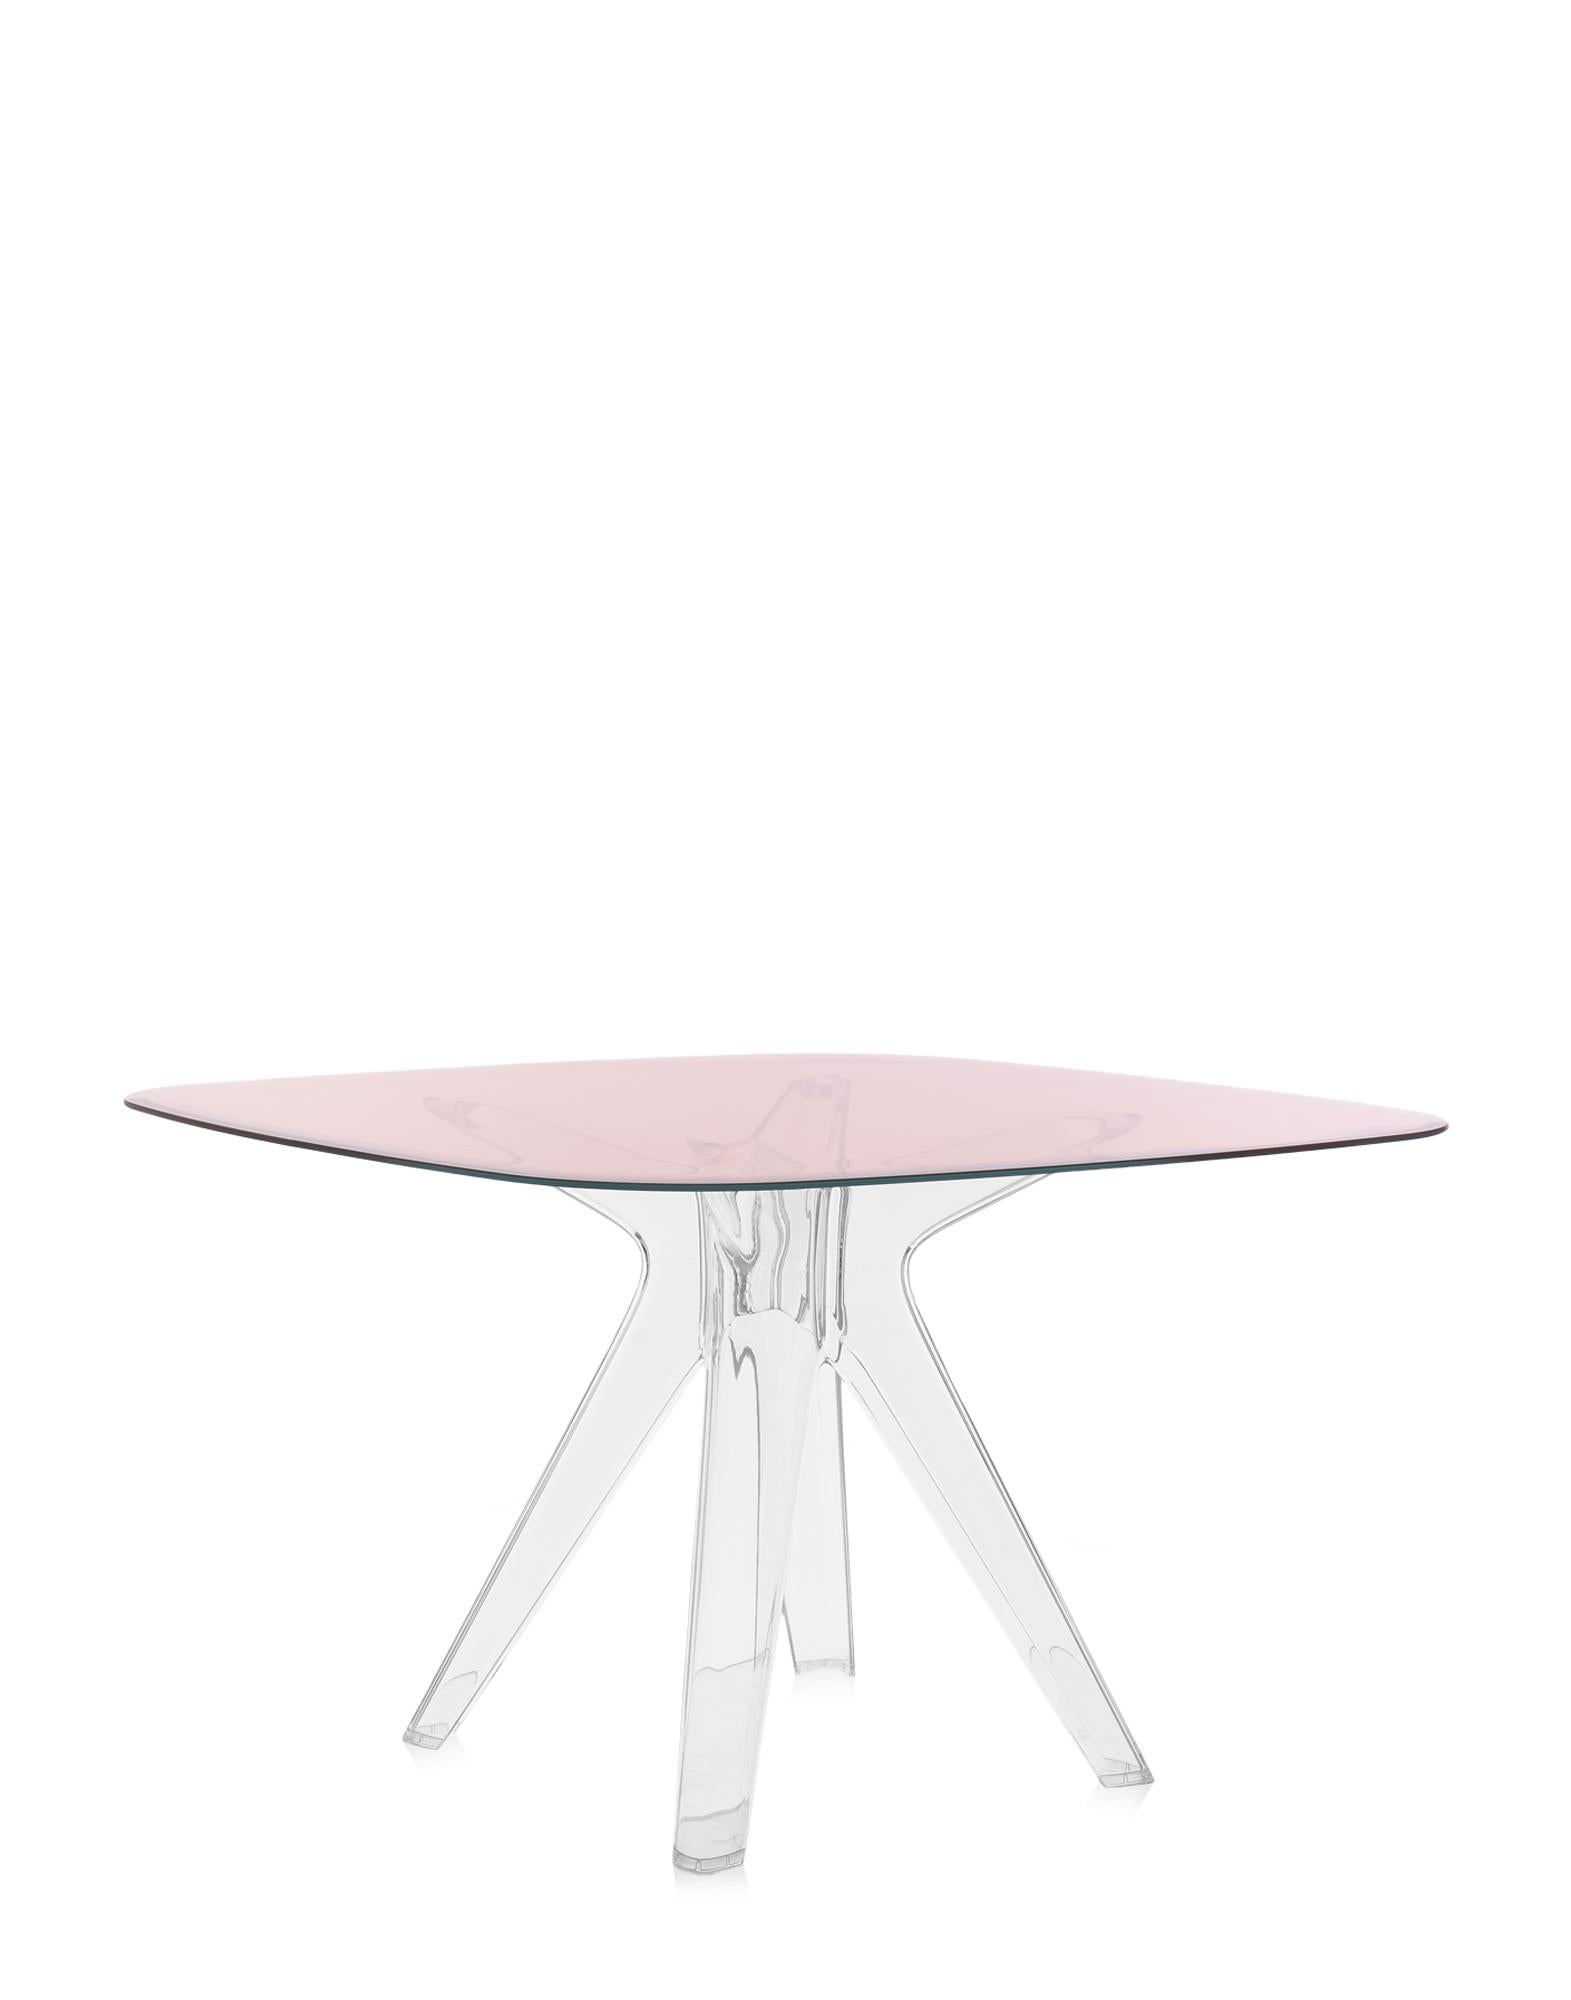 Contemporary Kartell Sir Gio Square Coffee Table with Pink Top by Philippe Starck